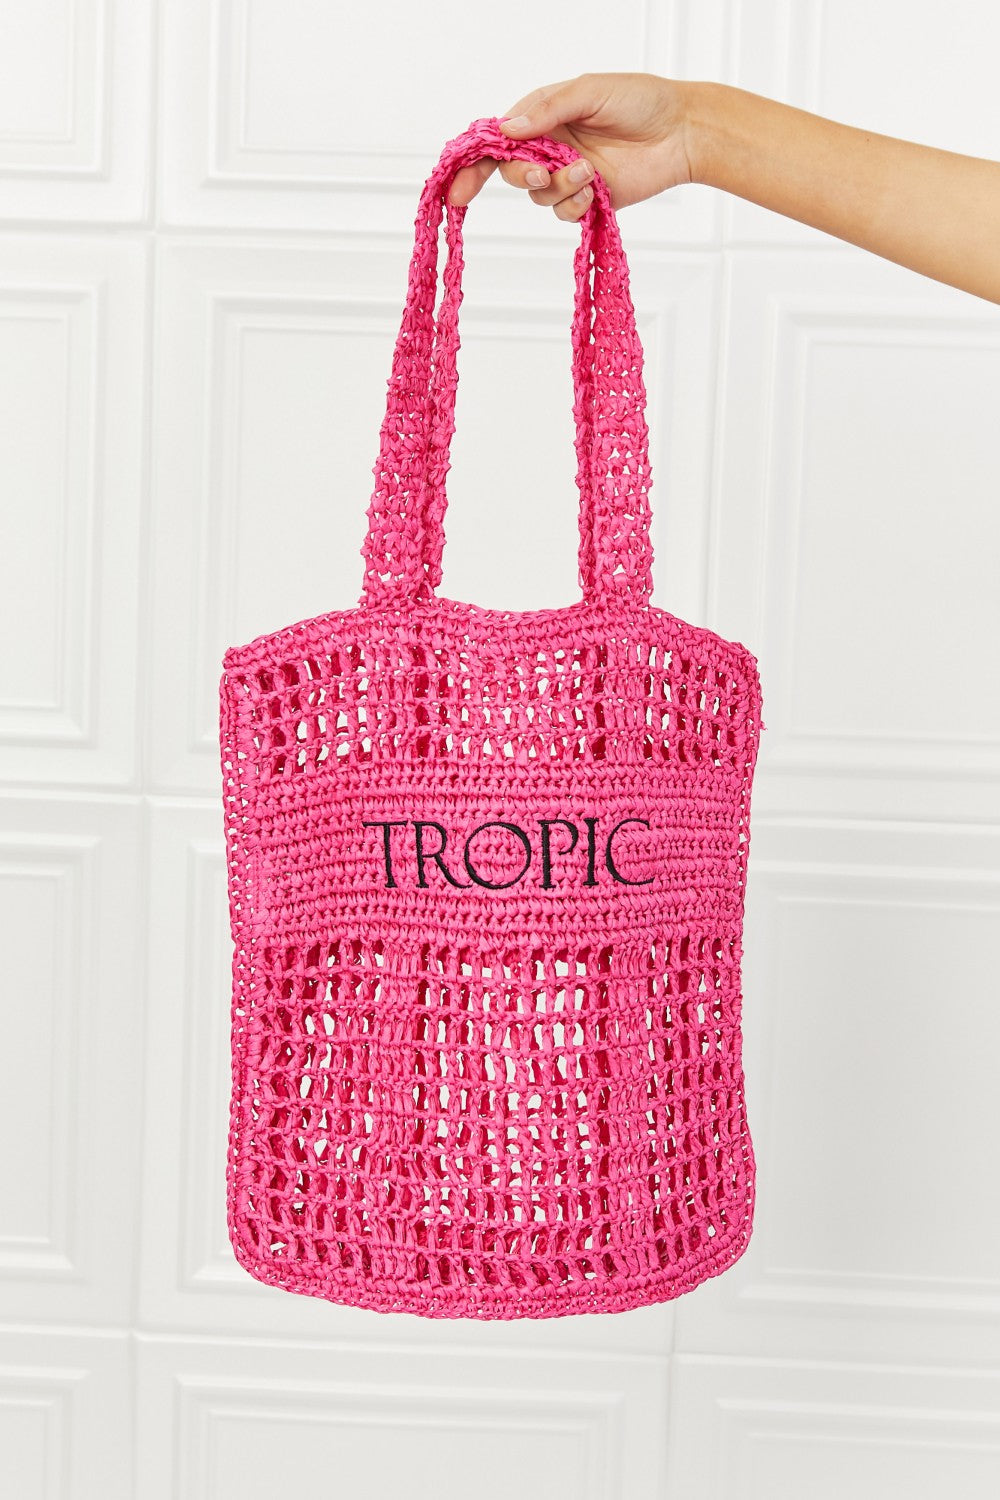 Fame Tropic Babe Staw Tote Bag COCO CRESS